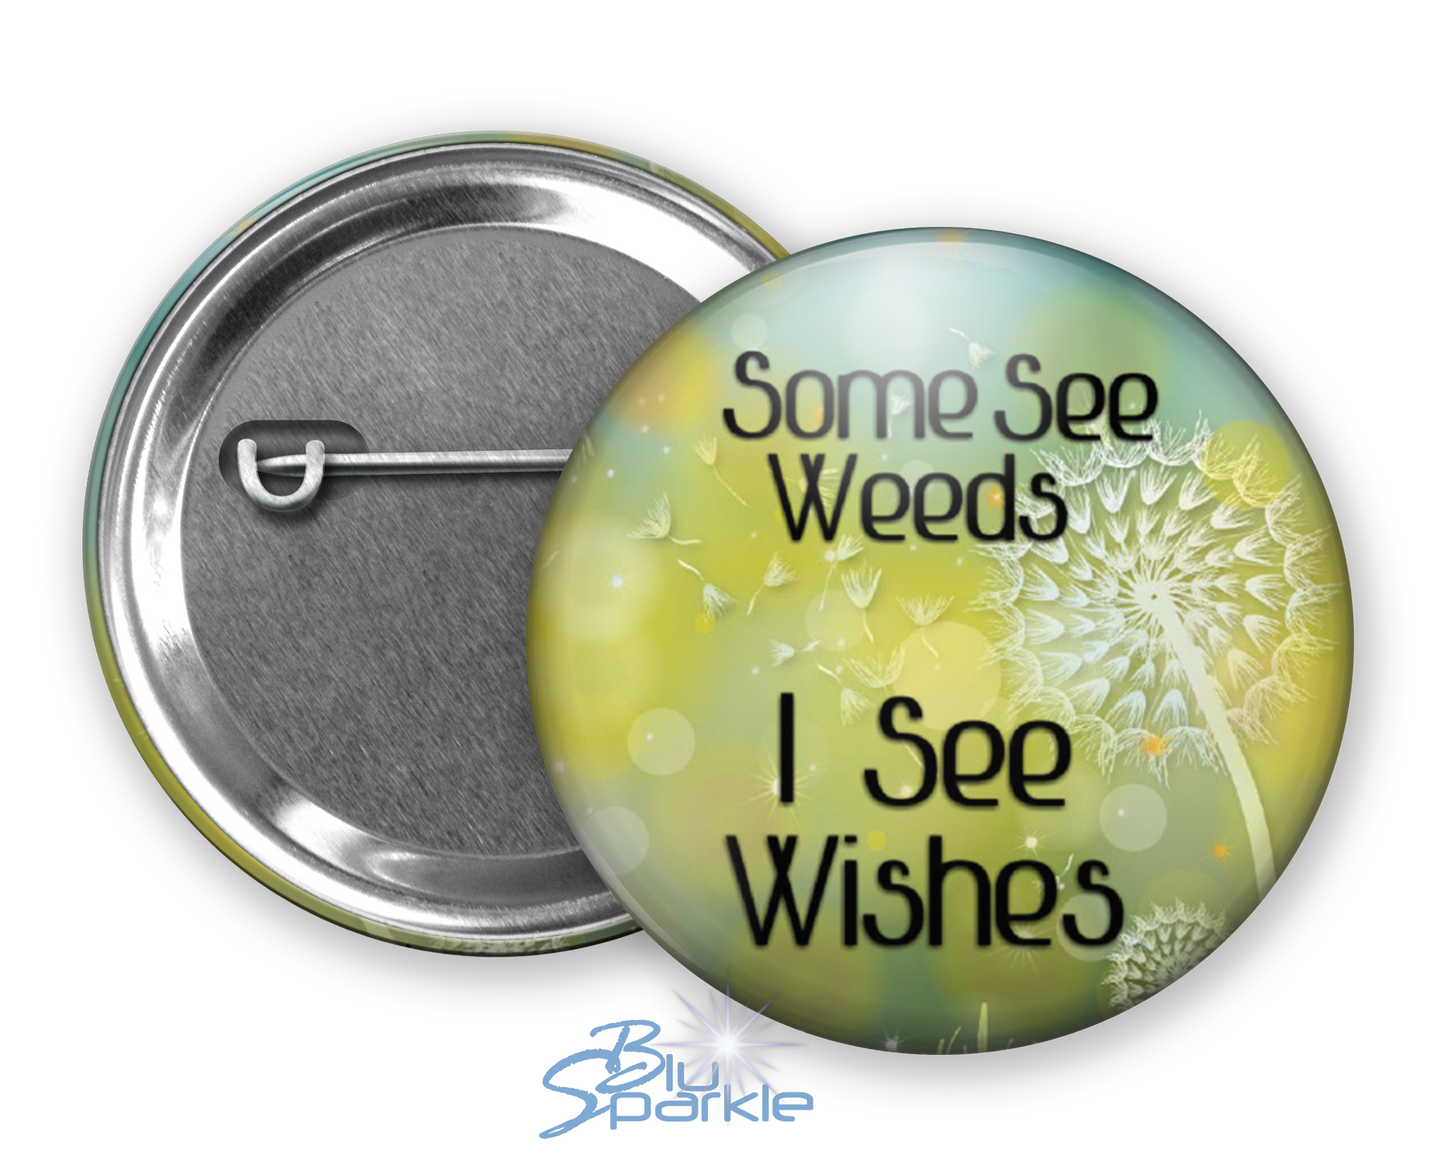 Some See Weeds, I See Wishes - Pinback Buttons